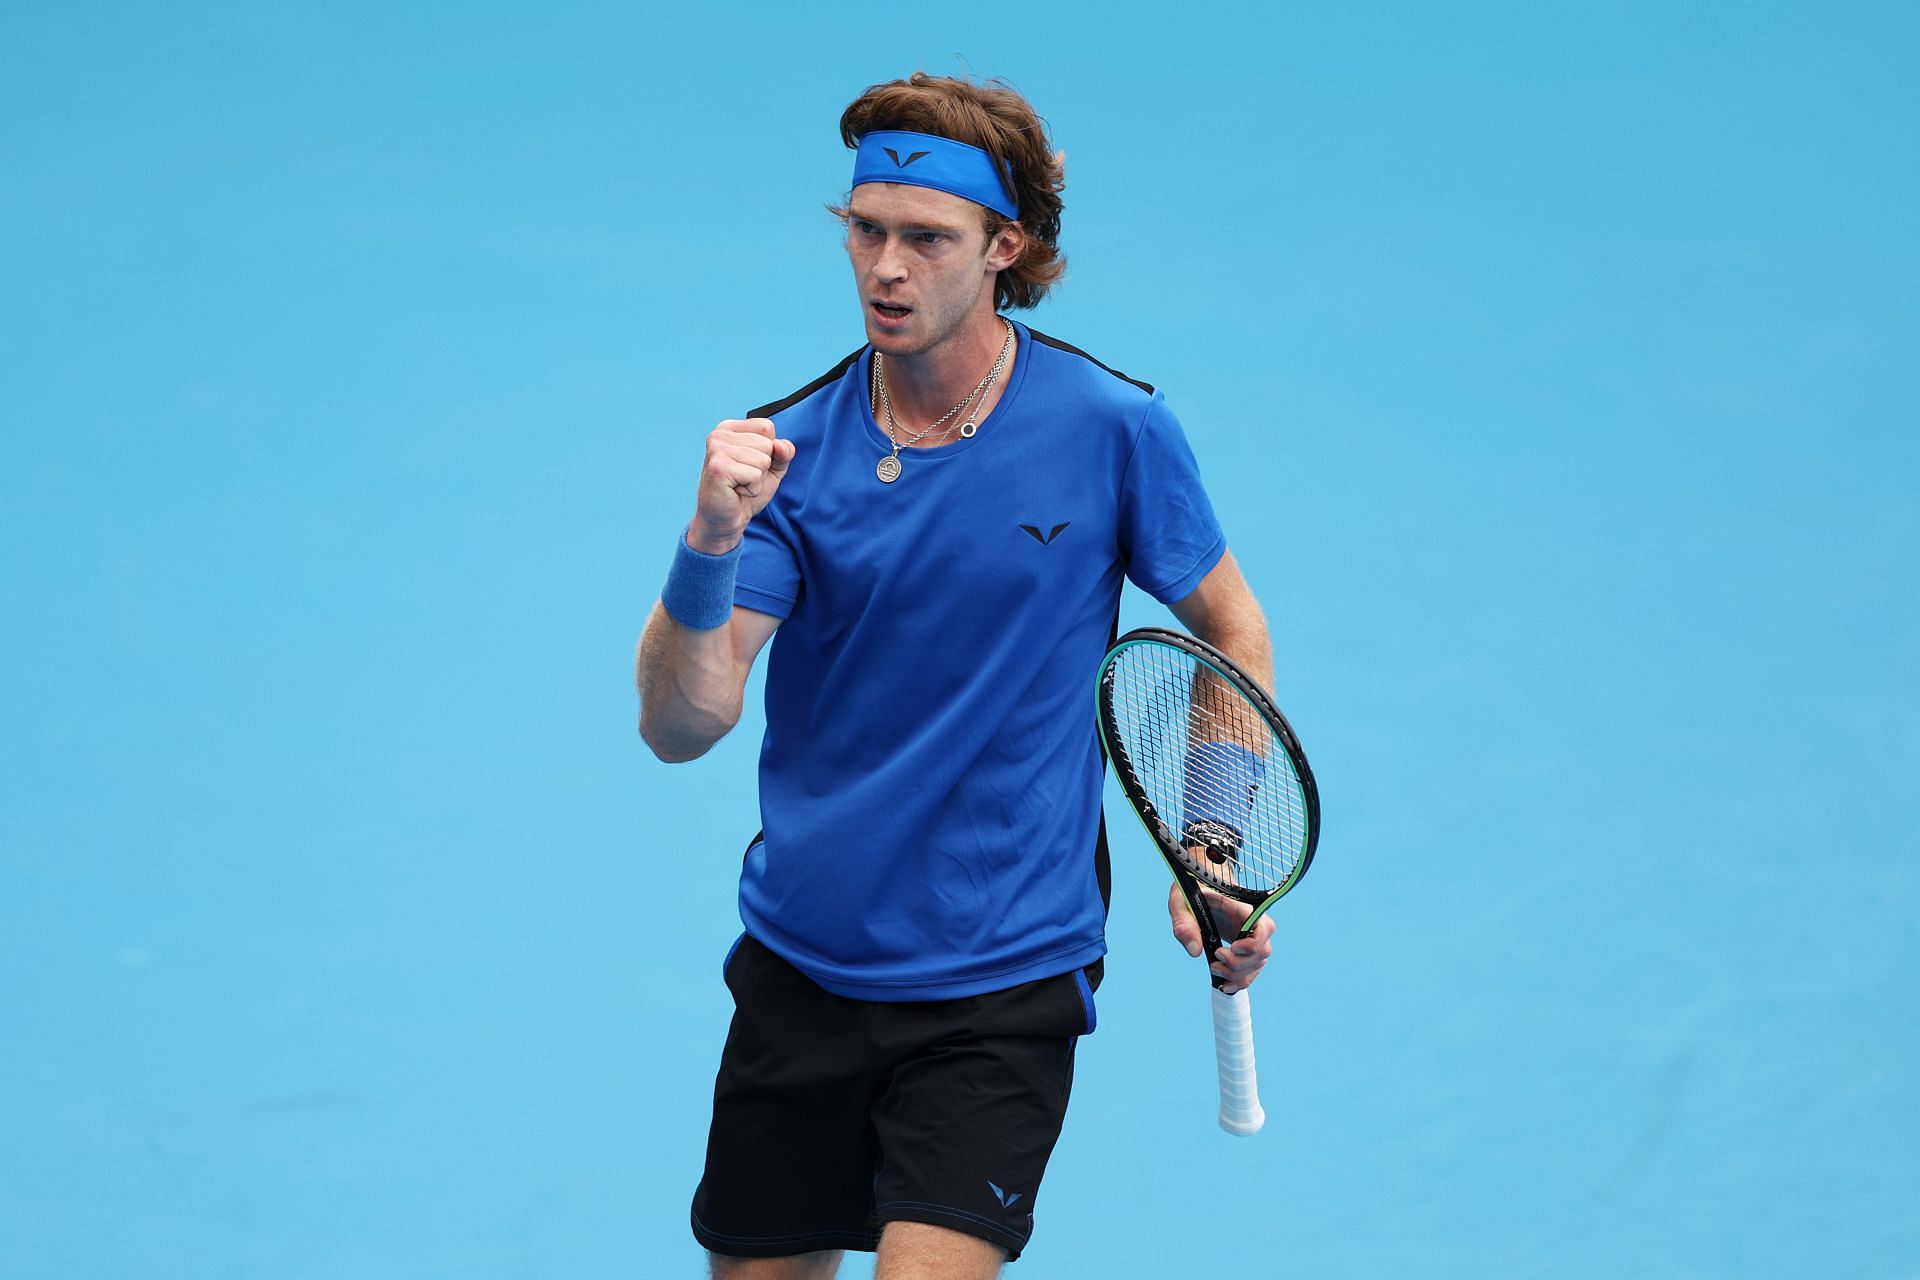 Andrey Rublev at the 2023 Australian Open.